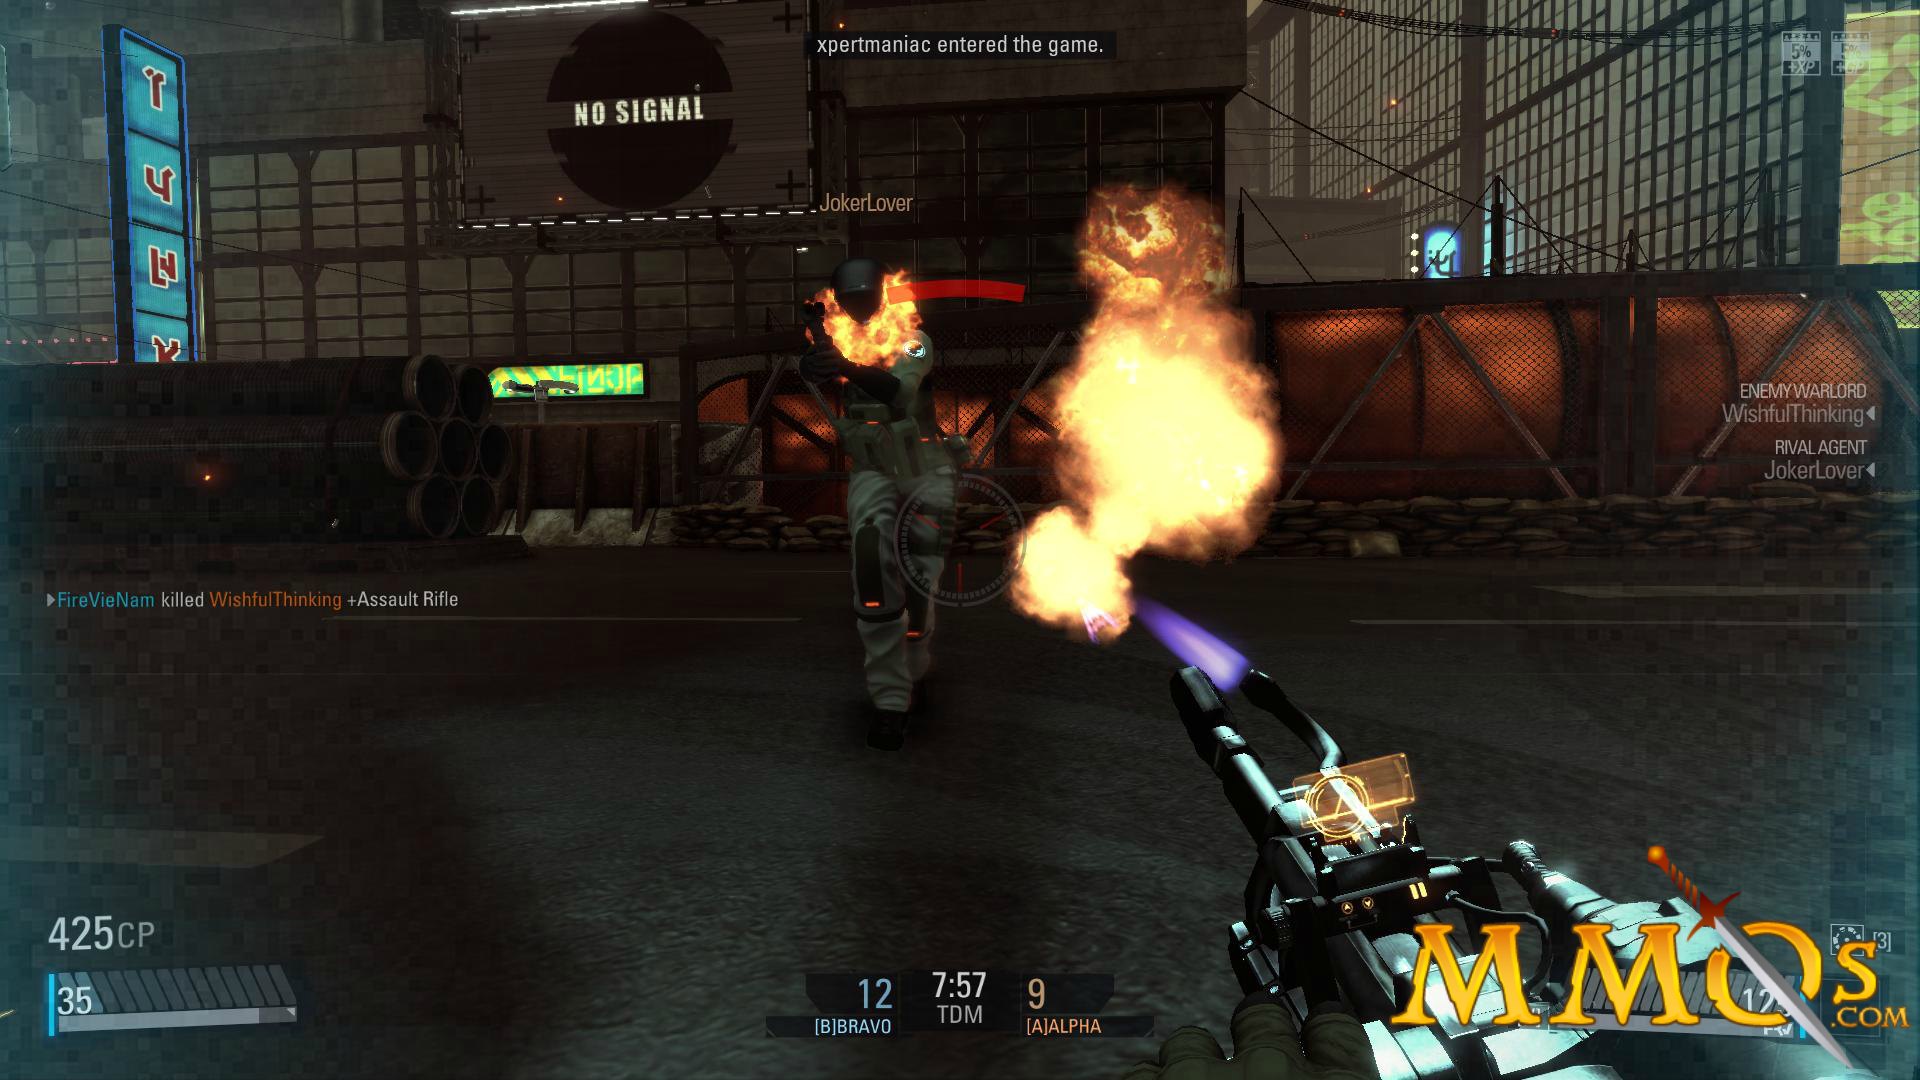 Free-to-Play FPS 'Blacklight: Retribution' Shutting Down in March